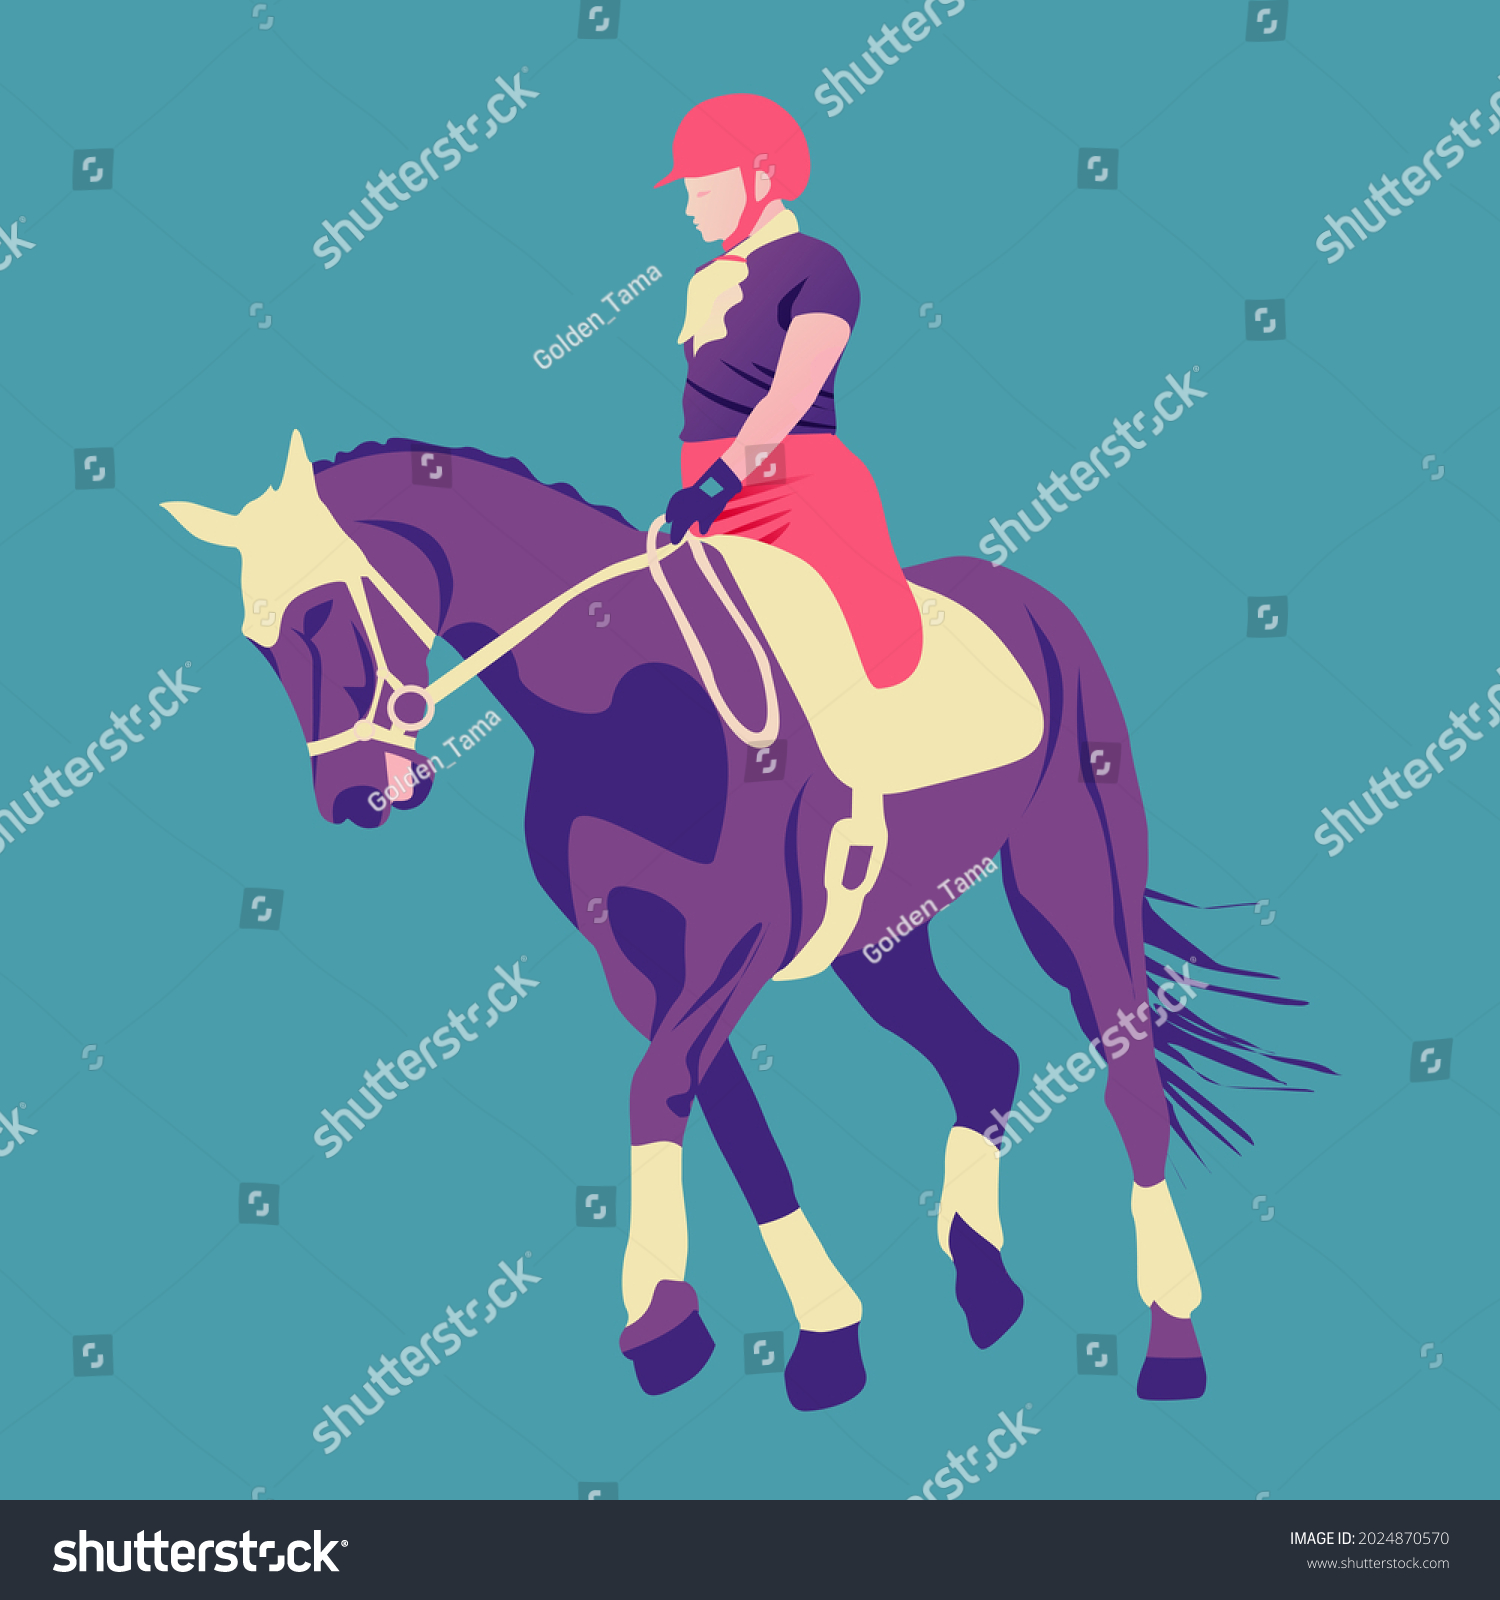 SVG of Cartoon illustration with a faceless disabled girl on a horse,  equestrian  svg